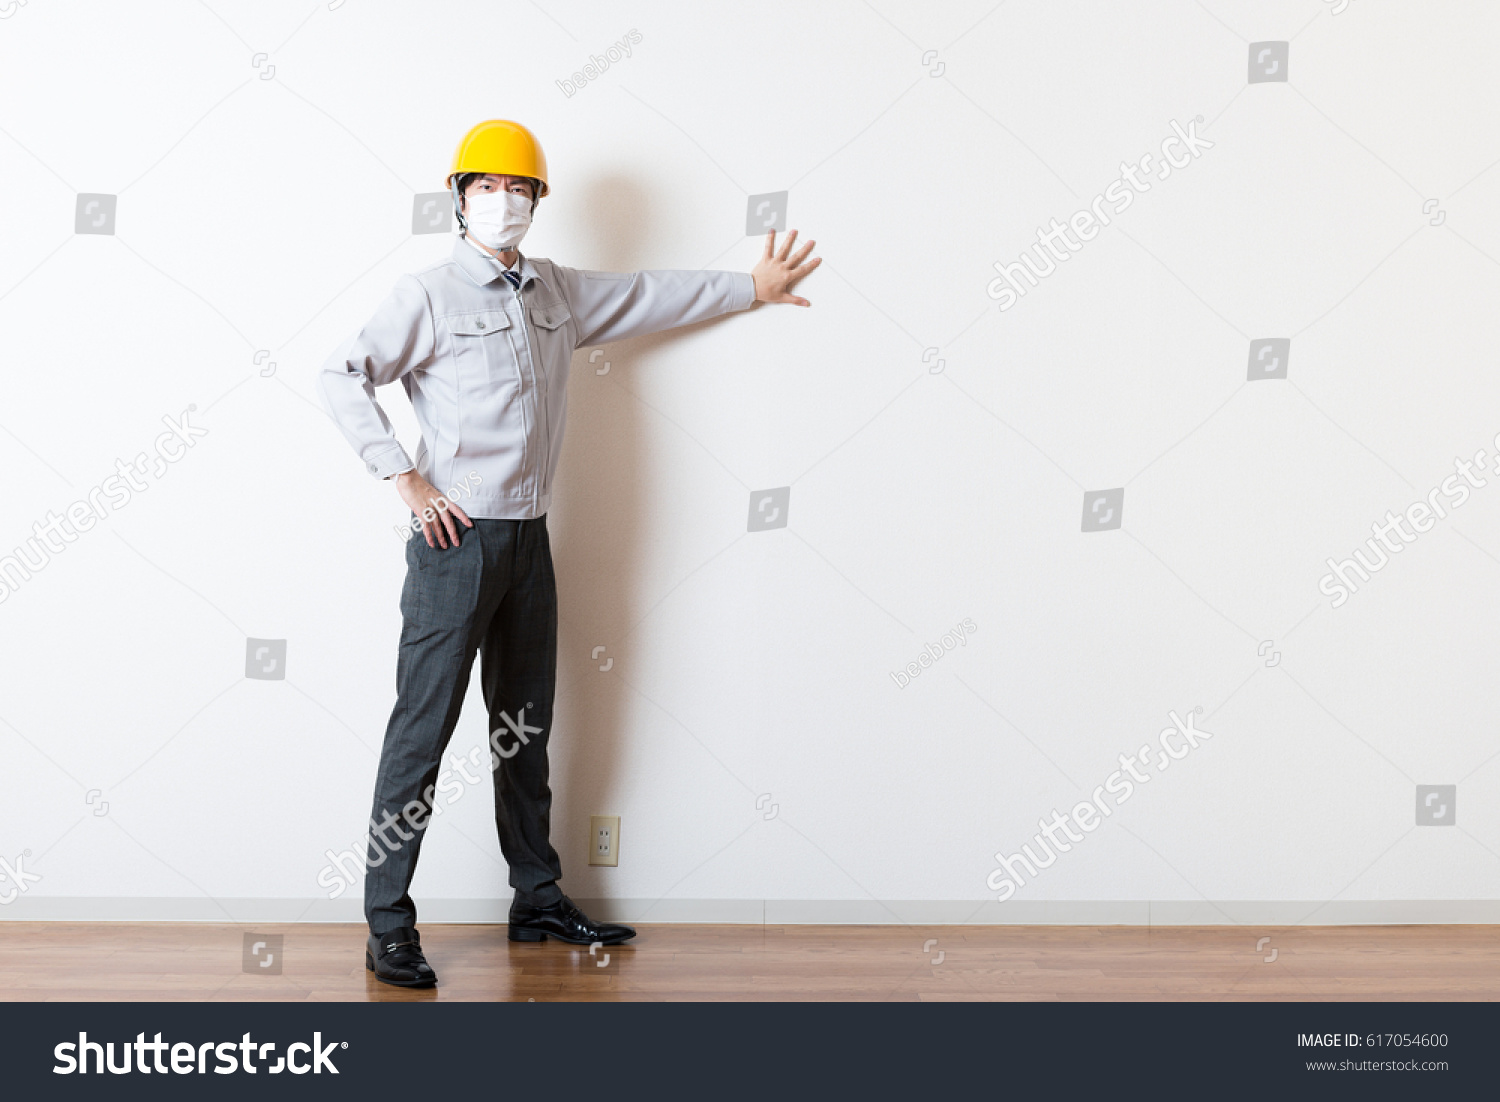 Men standing wearing work clothes with a white background #617054600